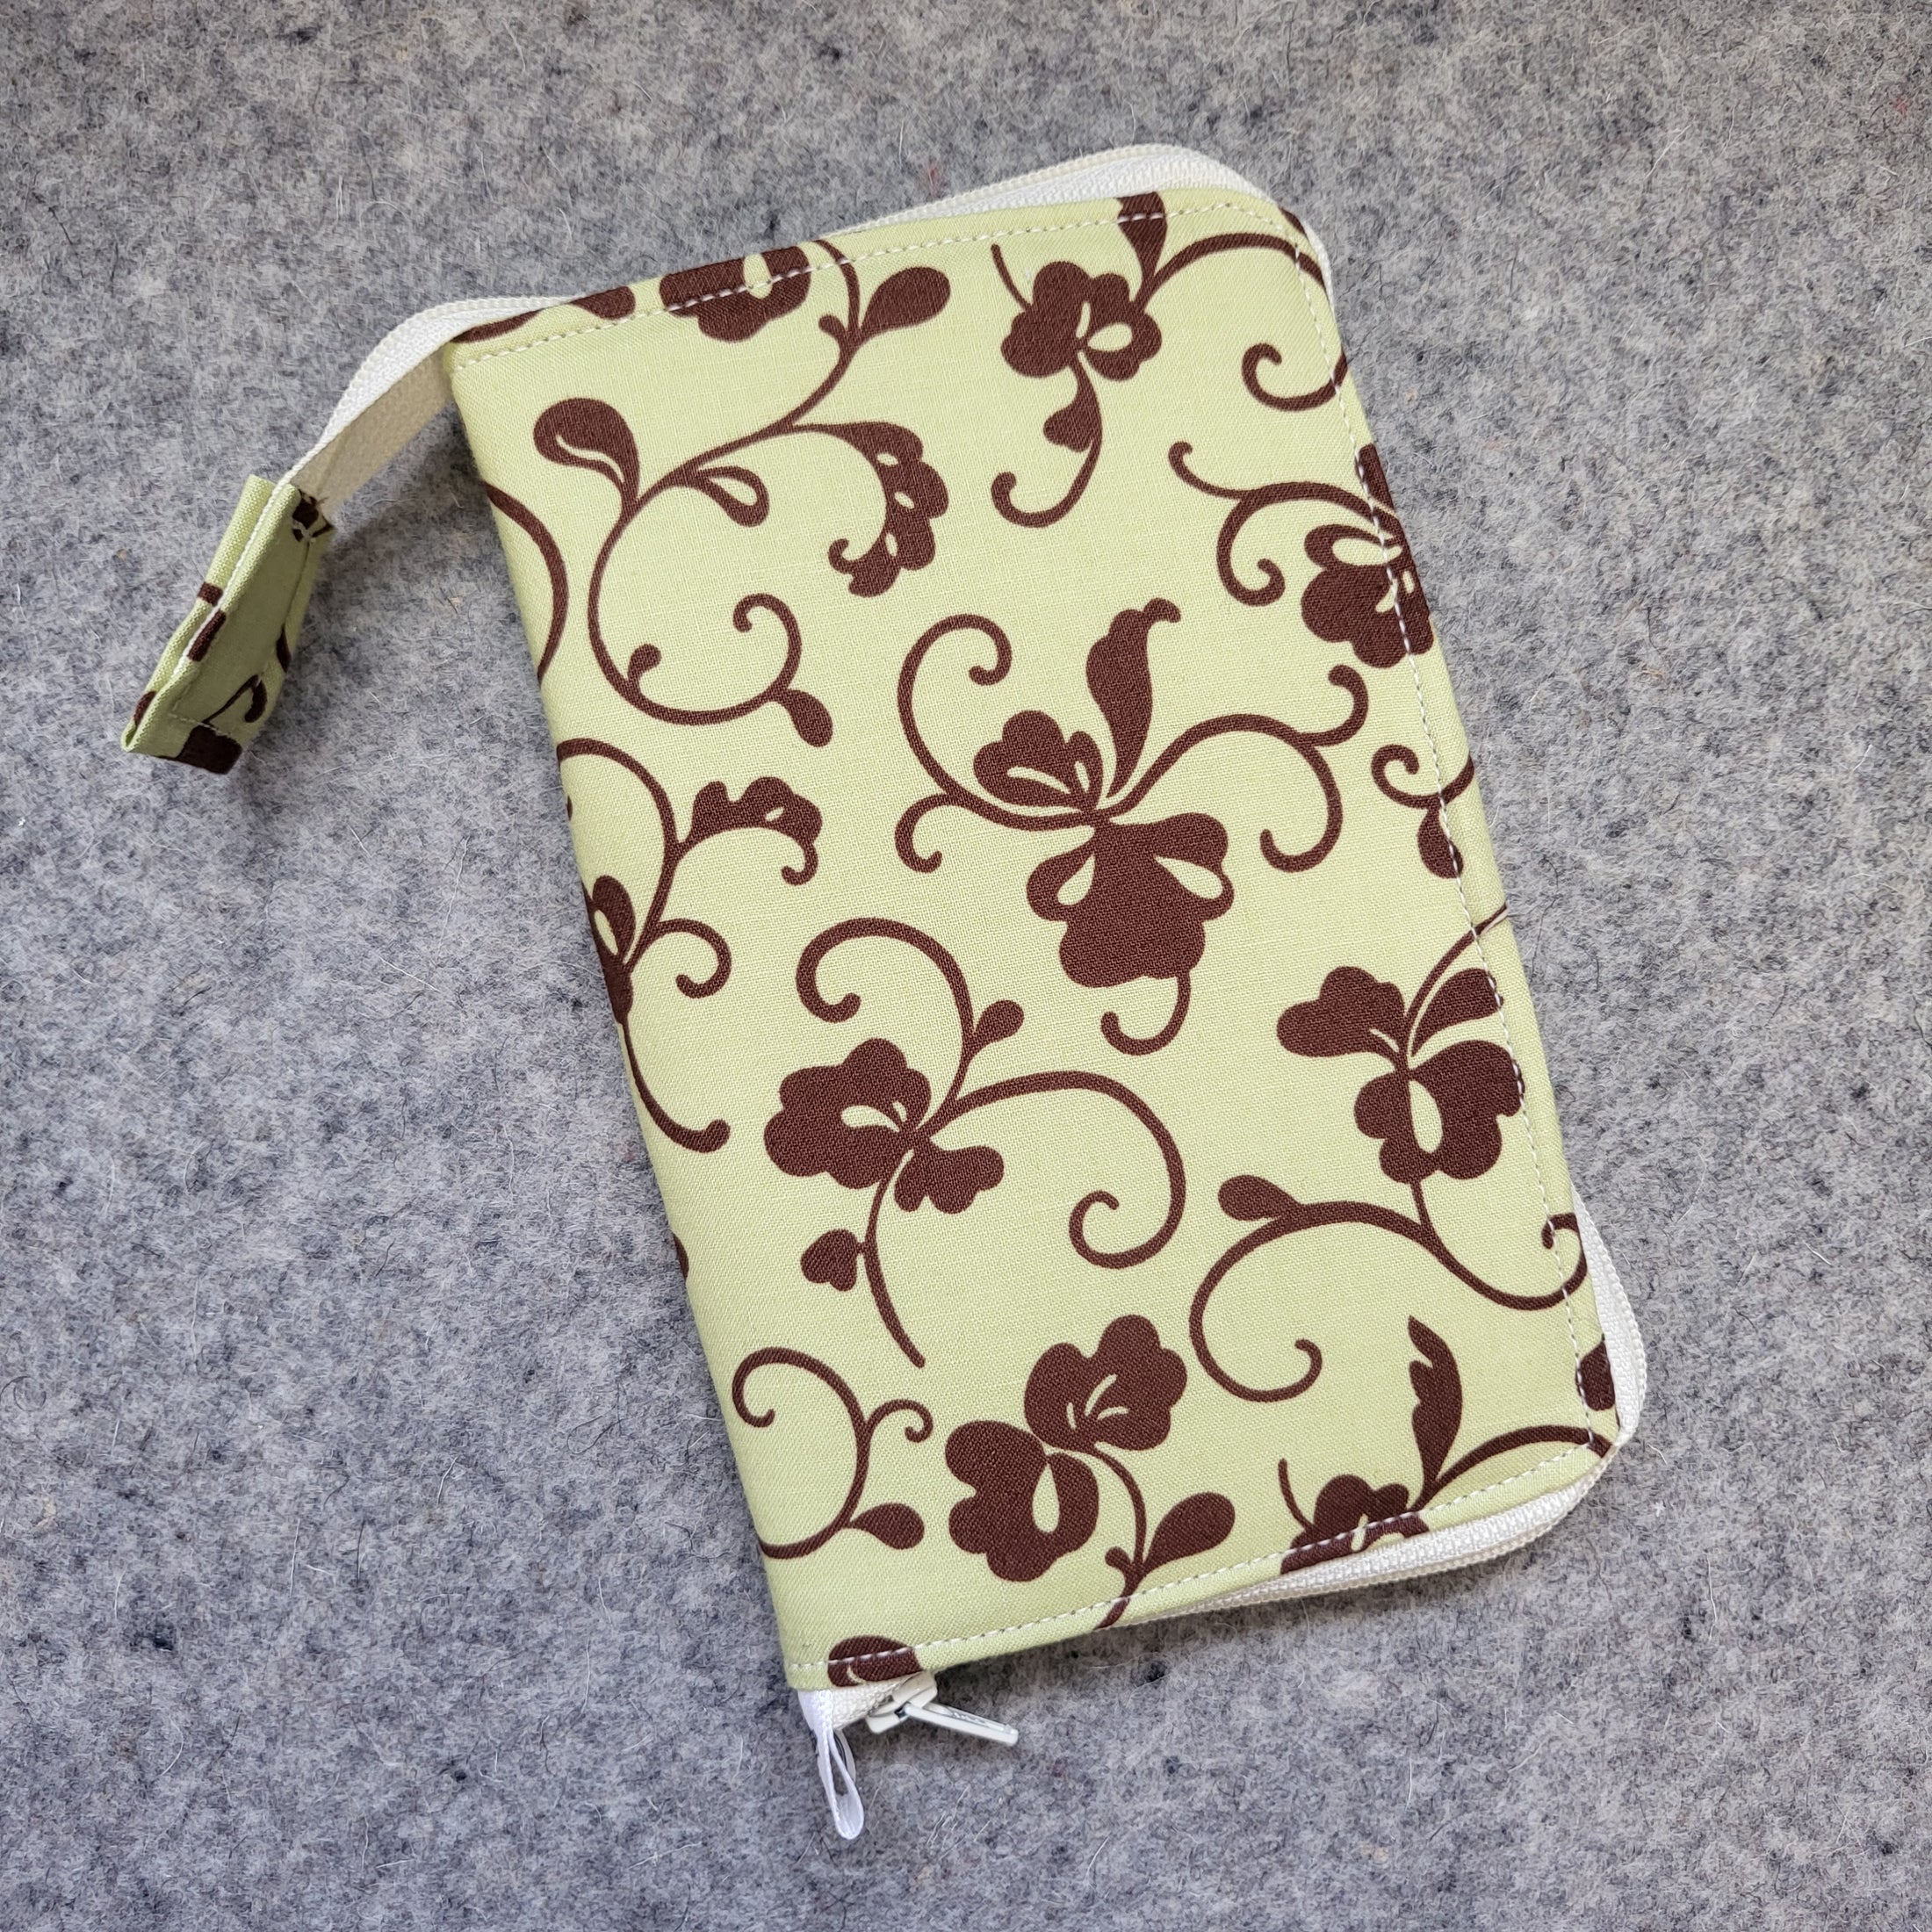 Original DPN organizer with green and brown floral fabric.